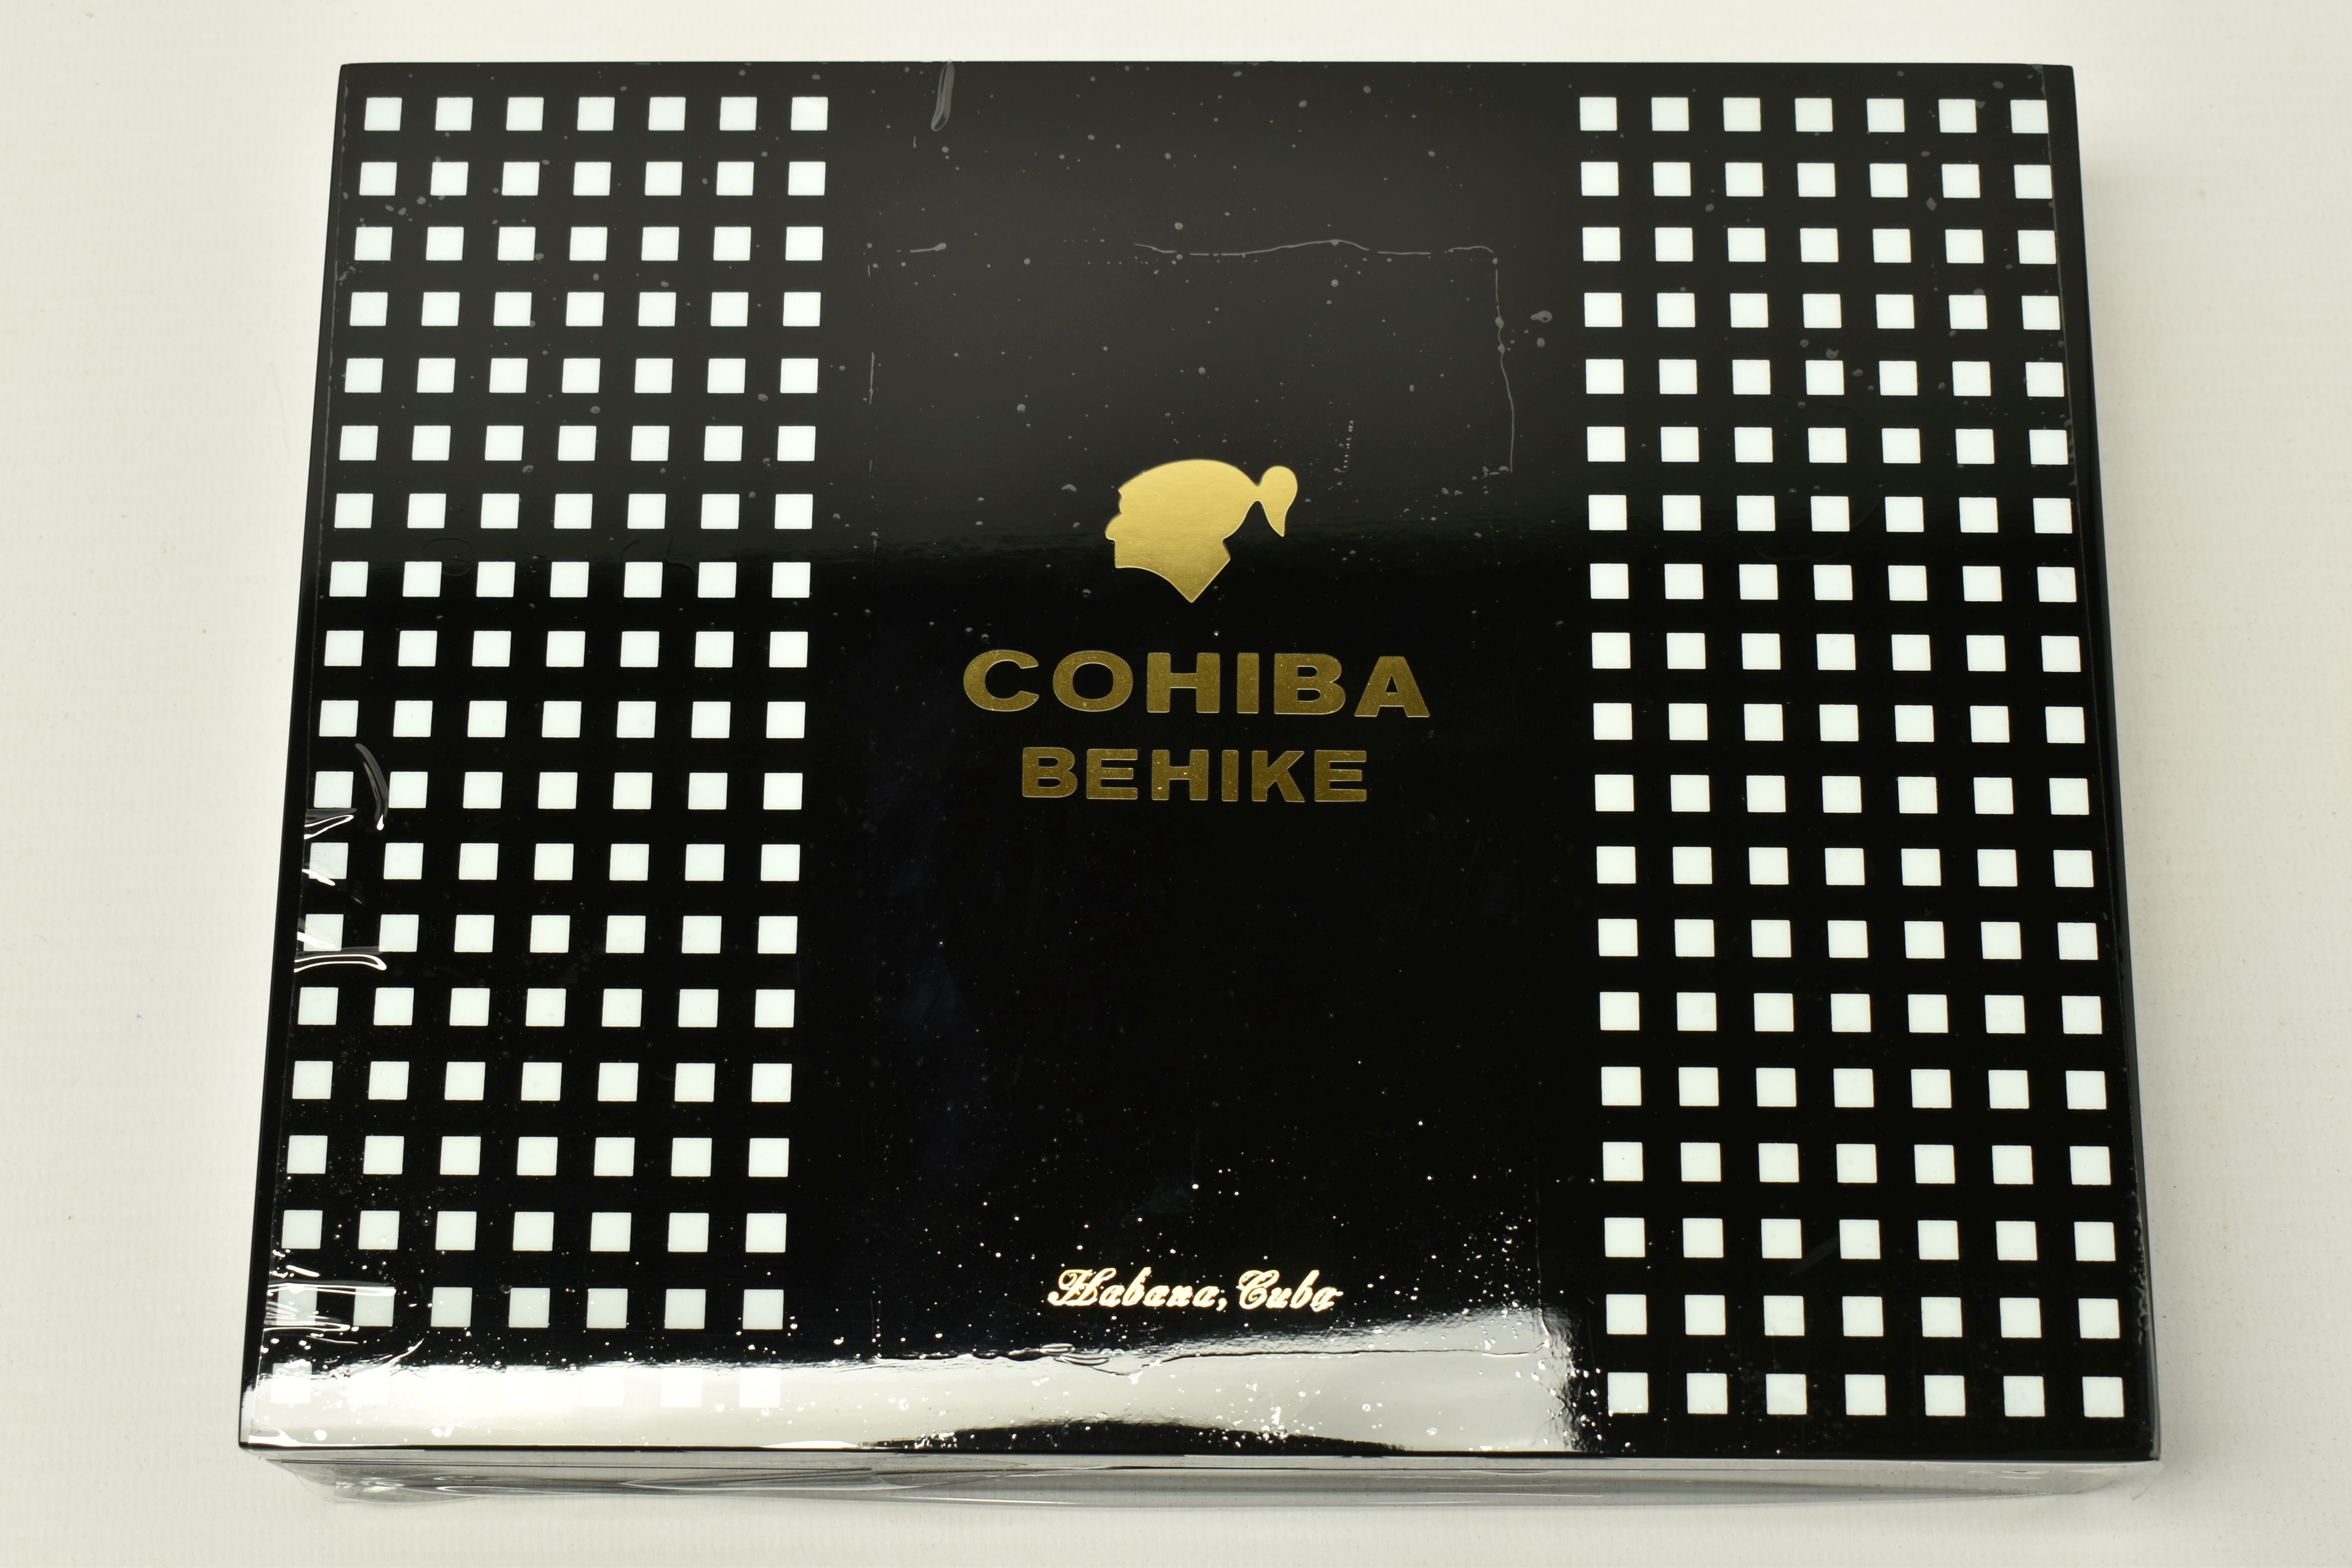 CIGARS, One Box of 10 COHIBA BEHIKE 56 Cigars, outer box seal (broken) and tear, has a barcode, - Image 4 of 8